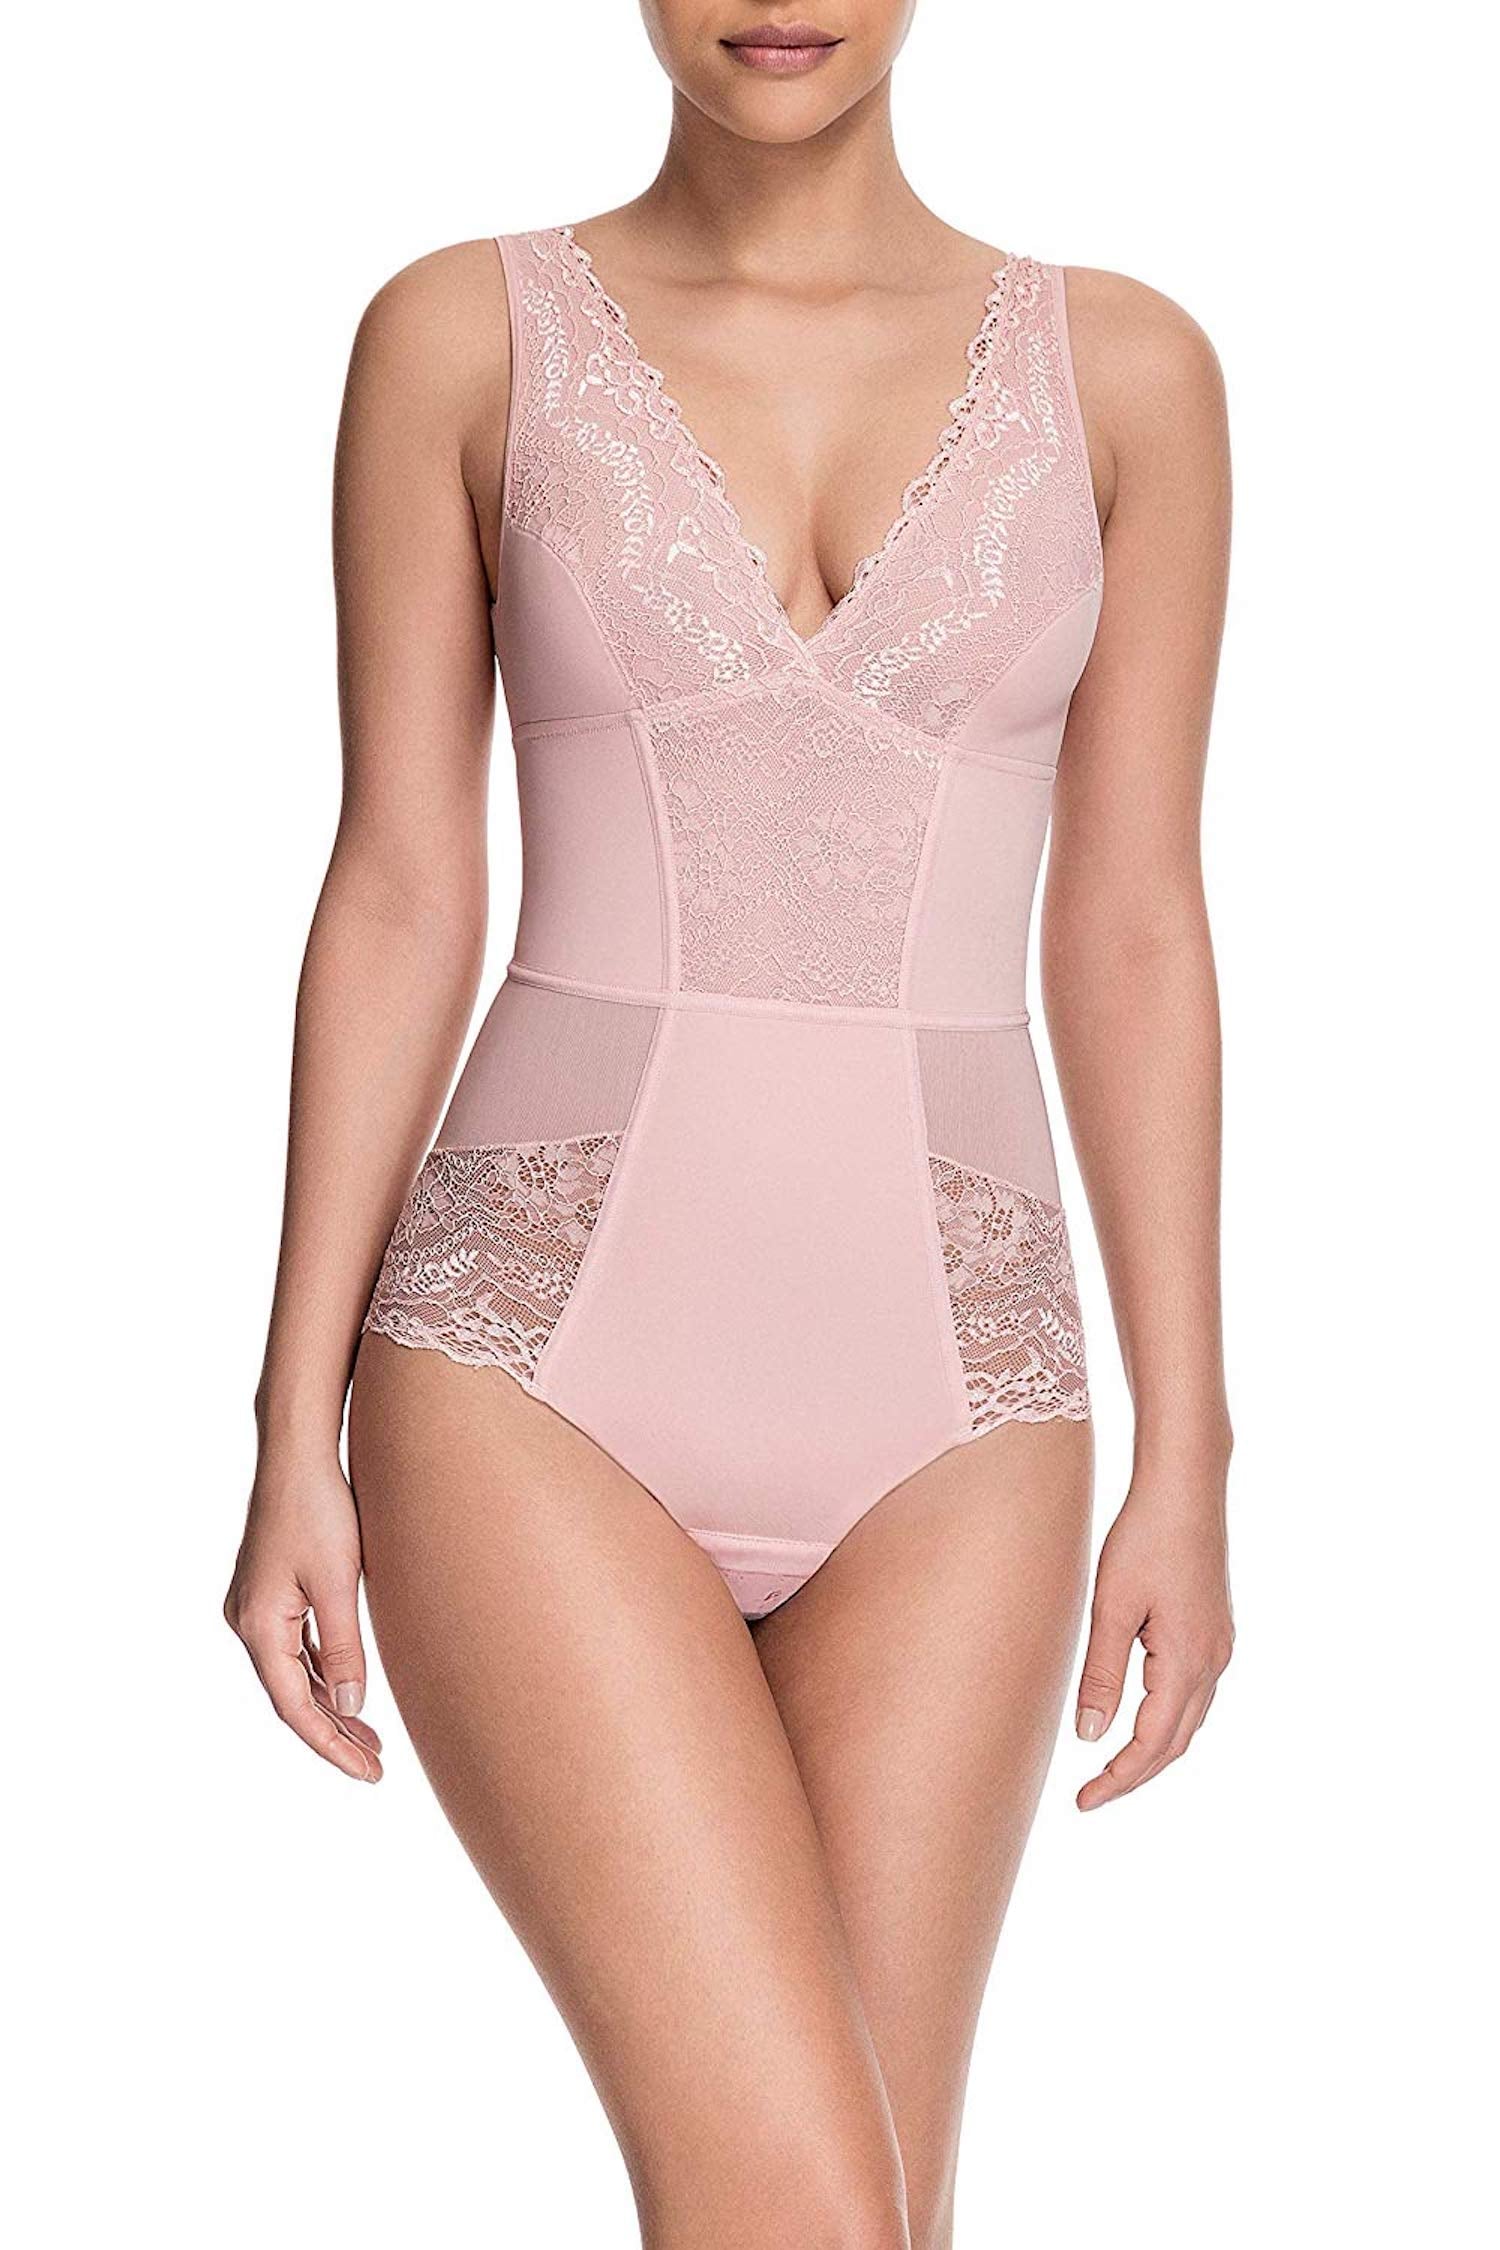 Bali Bras on Instagram: All over lace body shaper gives your